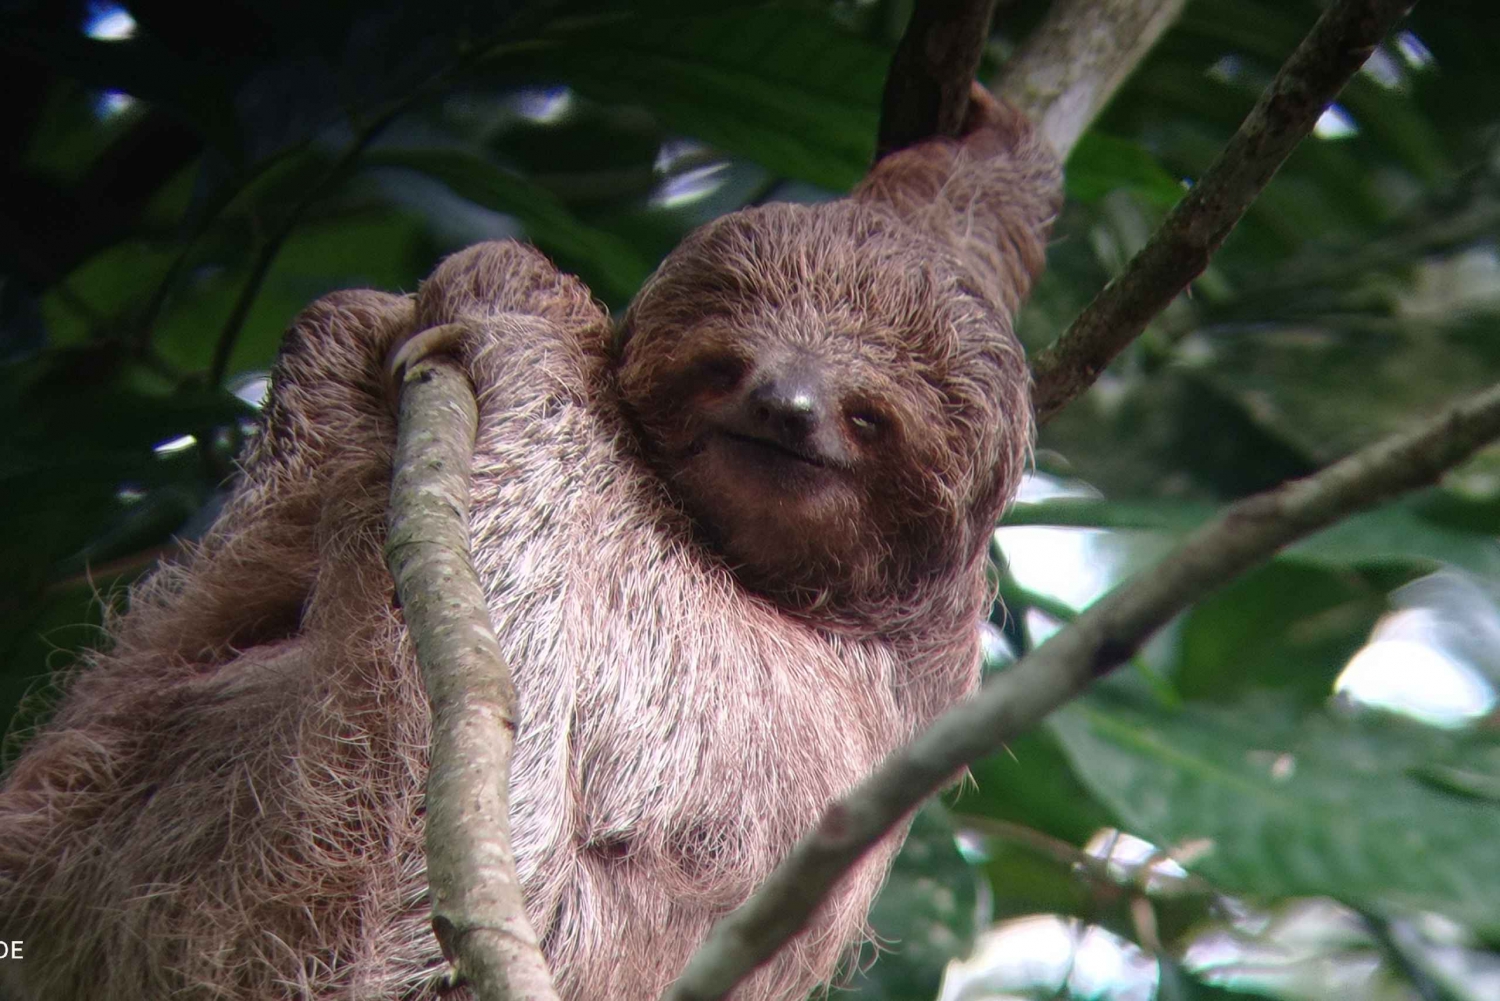 sloth observation and nature walk